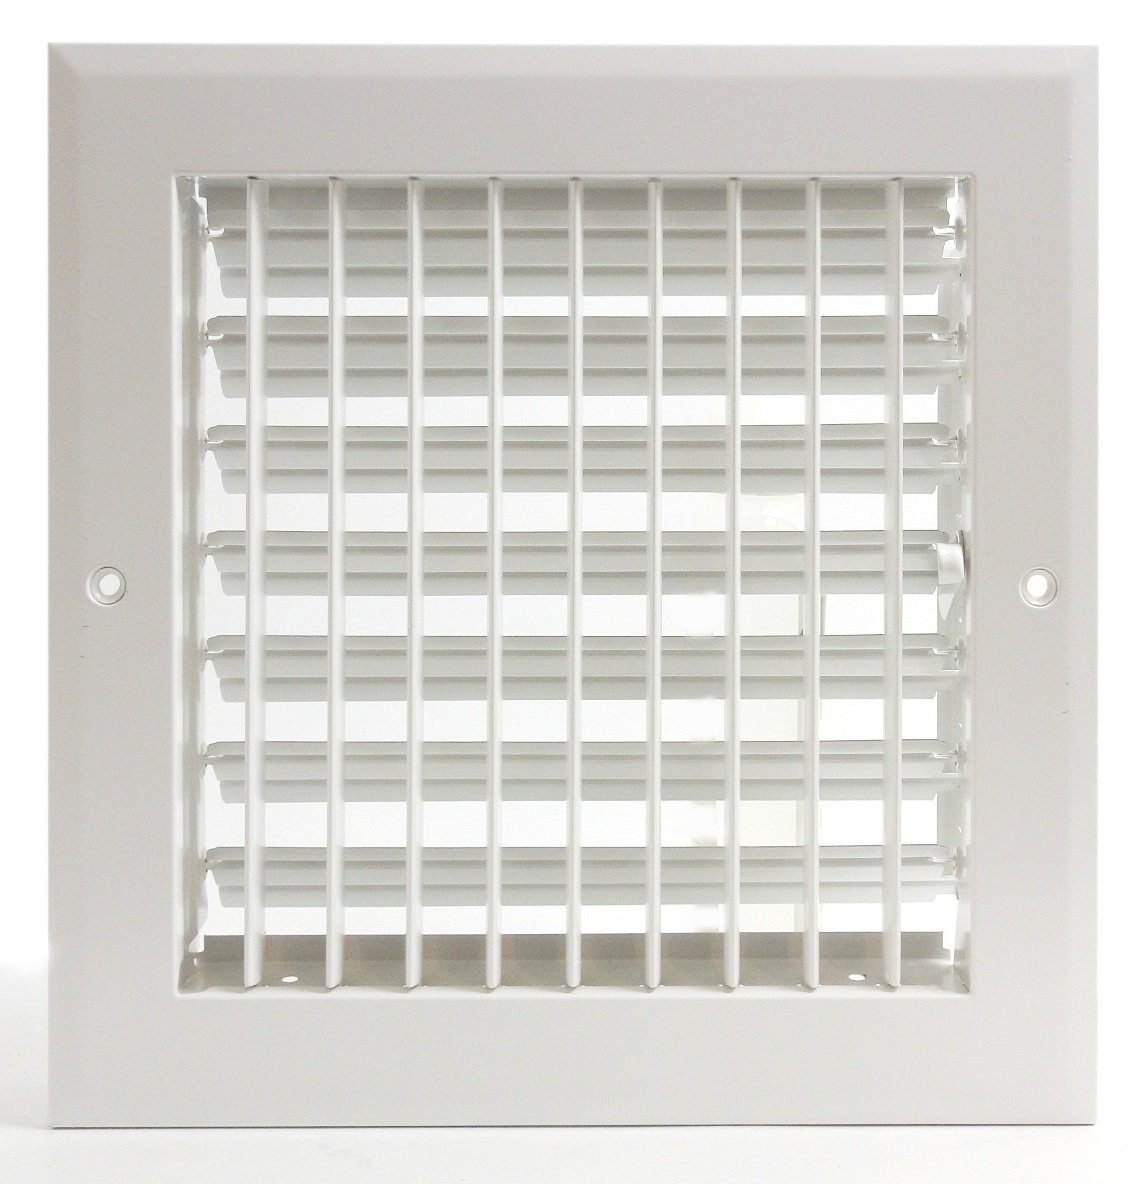 8&quot; x 8&quot; ADJUSTABLE AIR SUPPLY DIFFUSER - HVAC Vent Duct Cover Sidewall or Ceiling